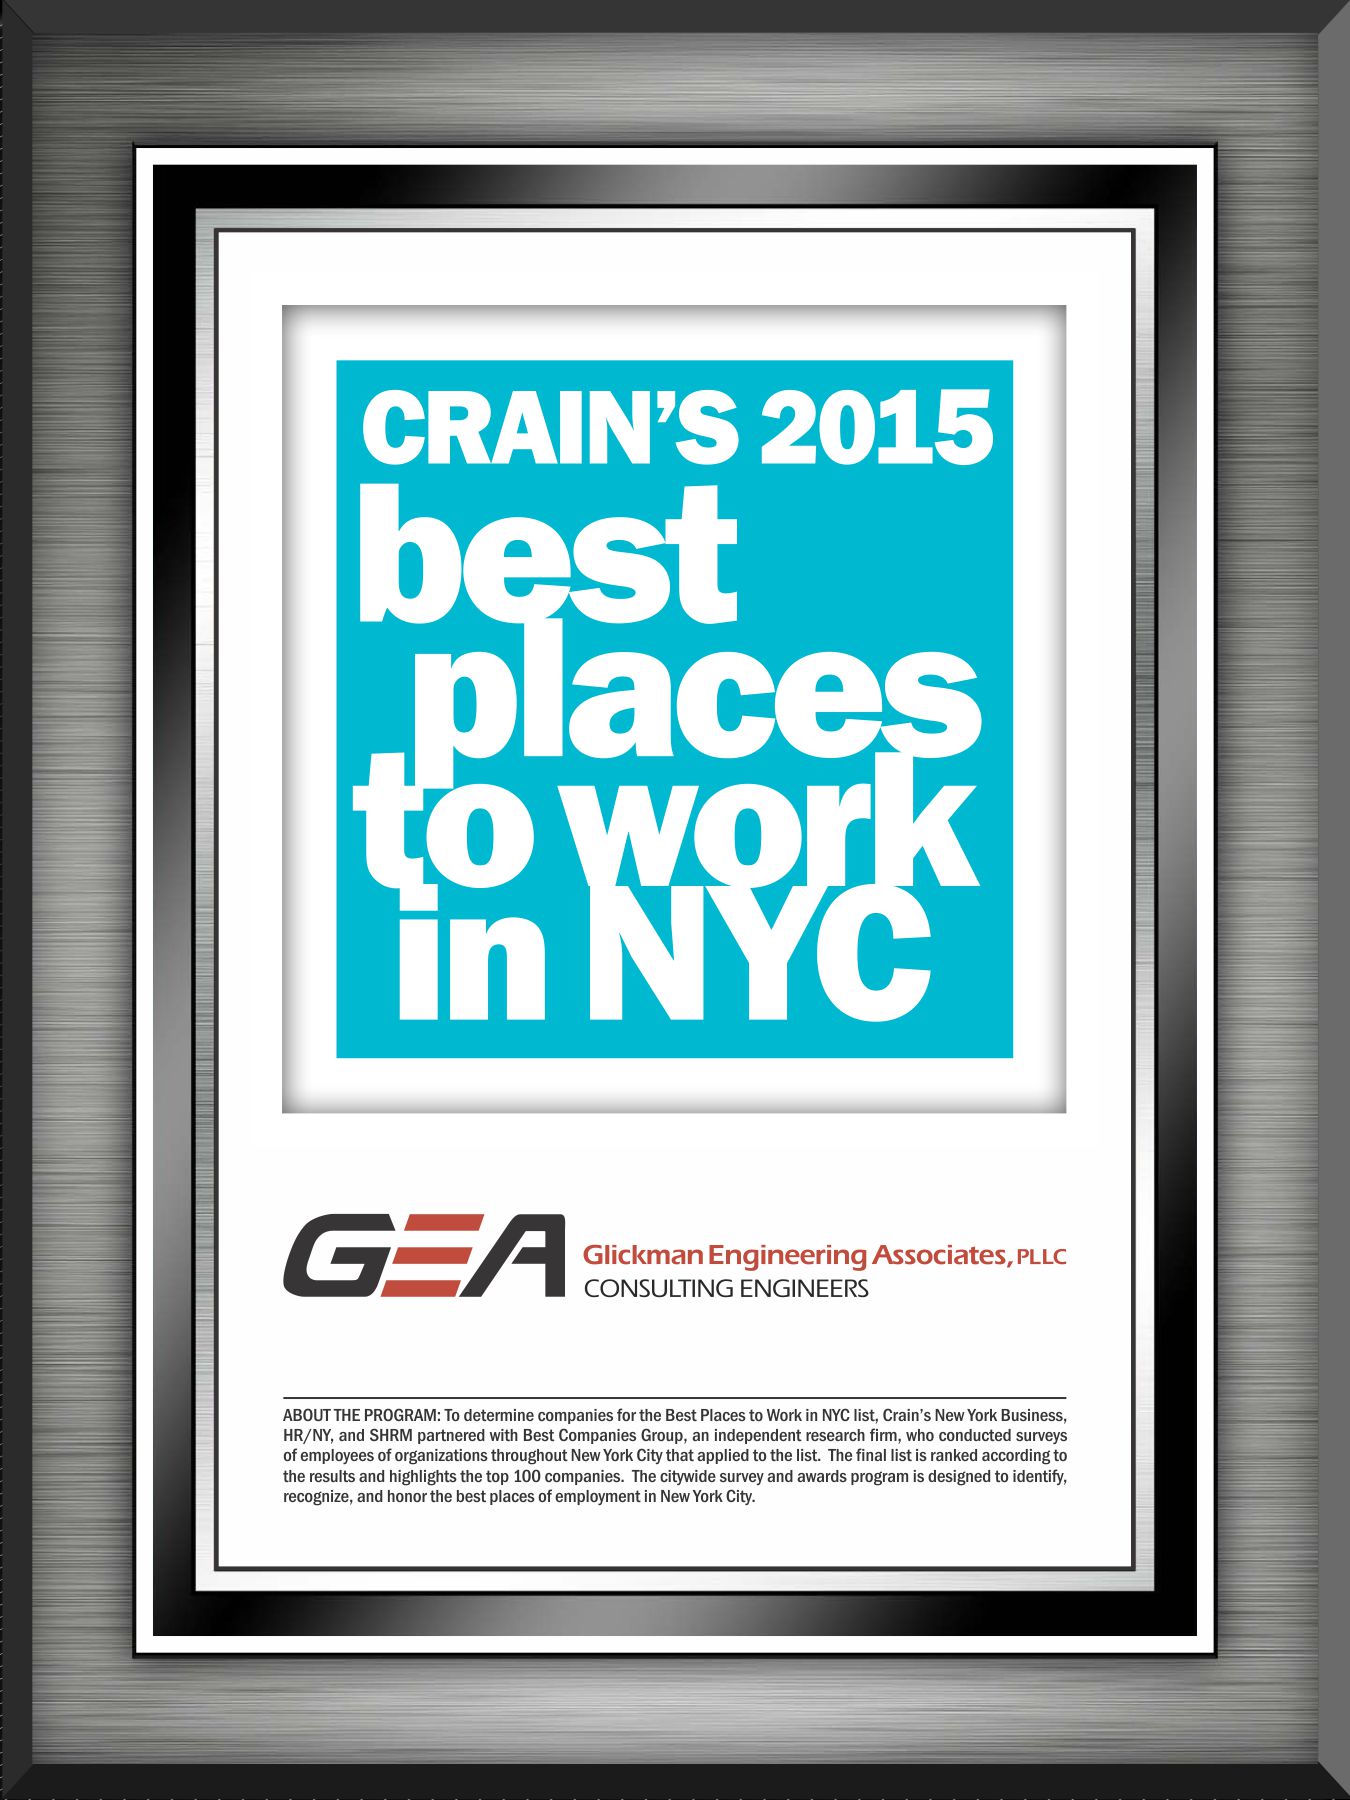 GEA Makes the Coveted “Crain’s 100 Best Firms to Work For in NYC”